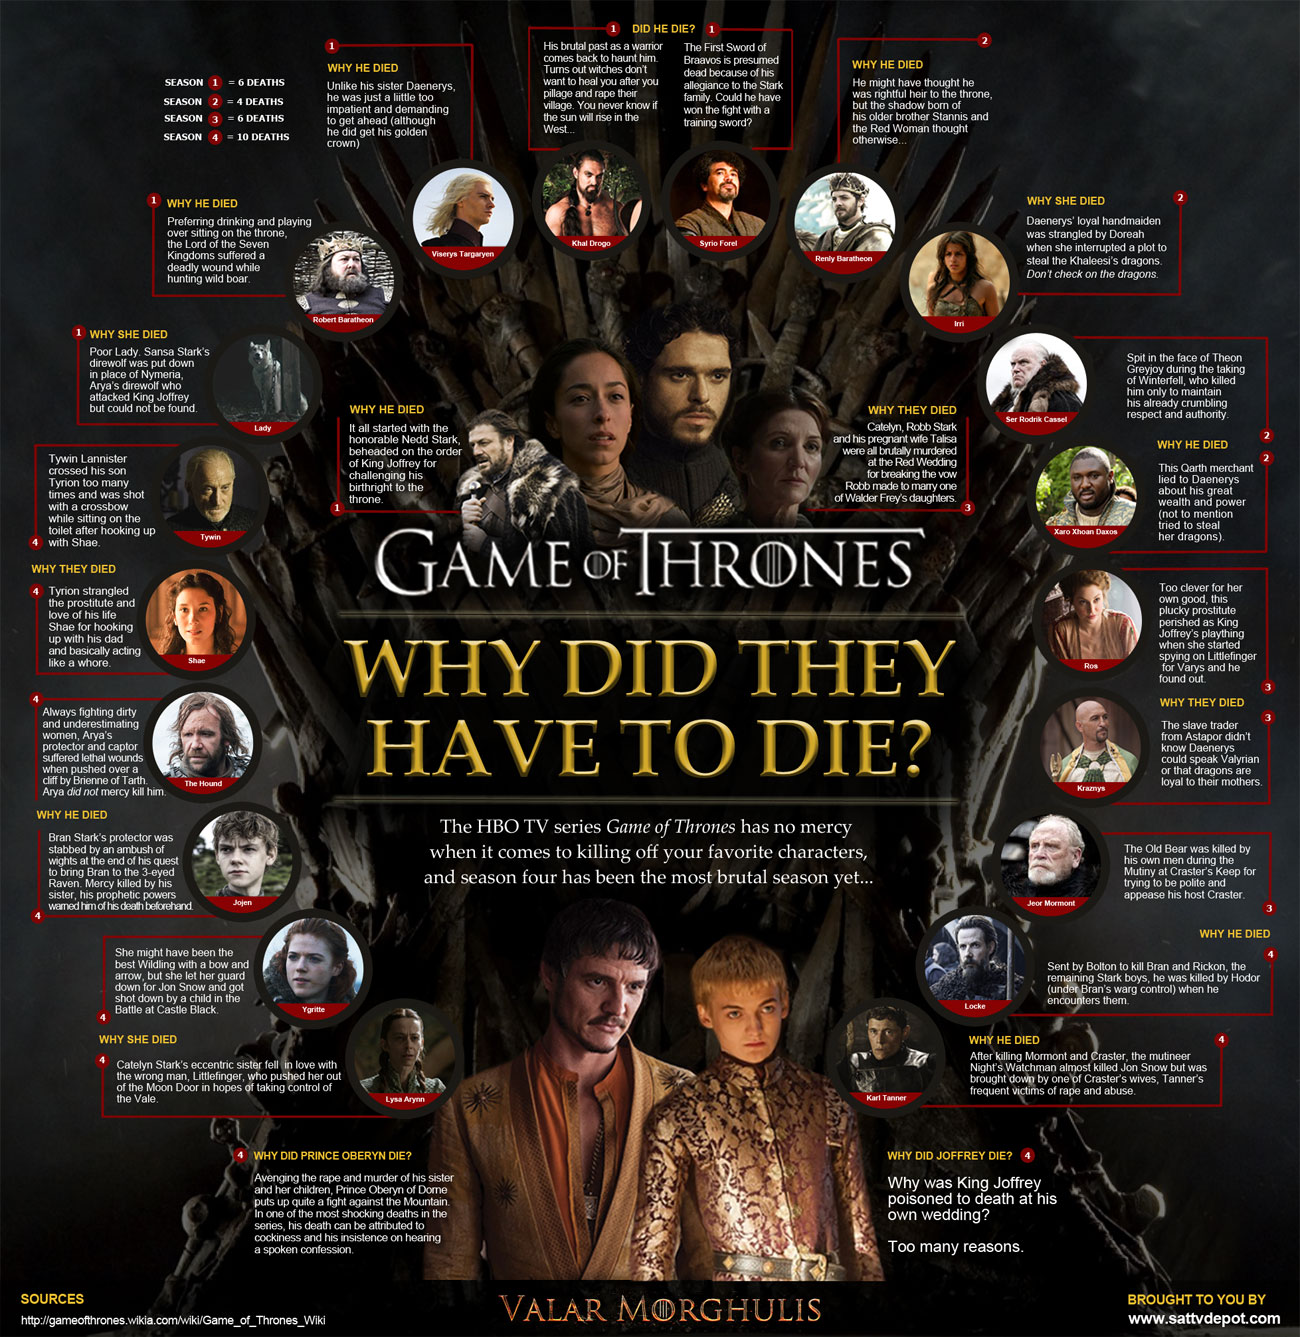 how much time has passed in the game of thrones universe